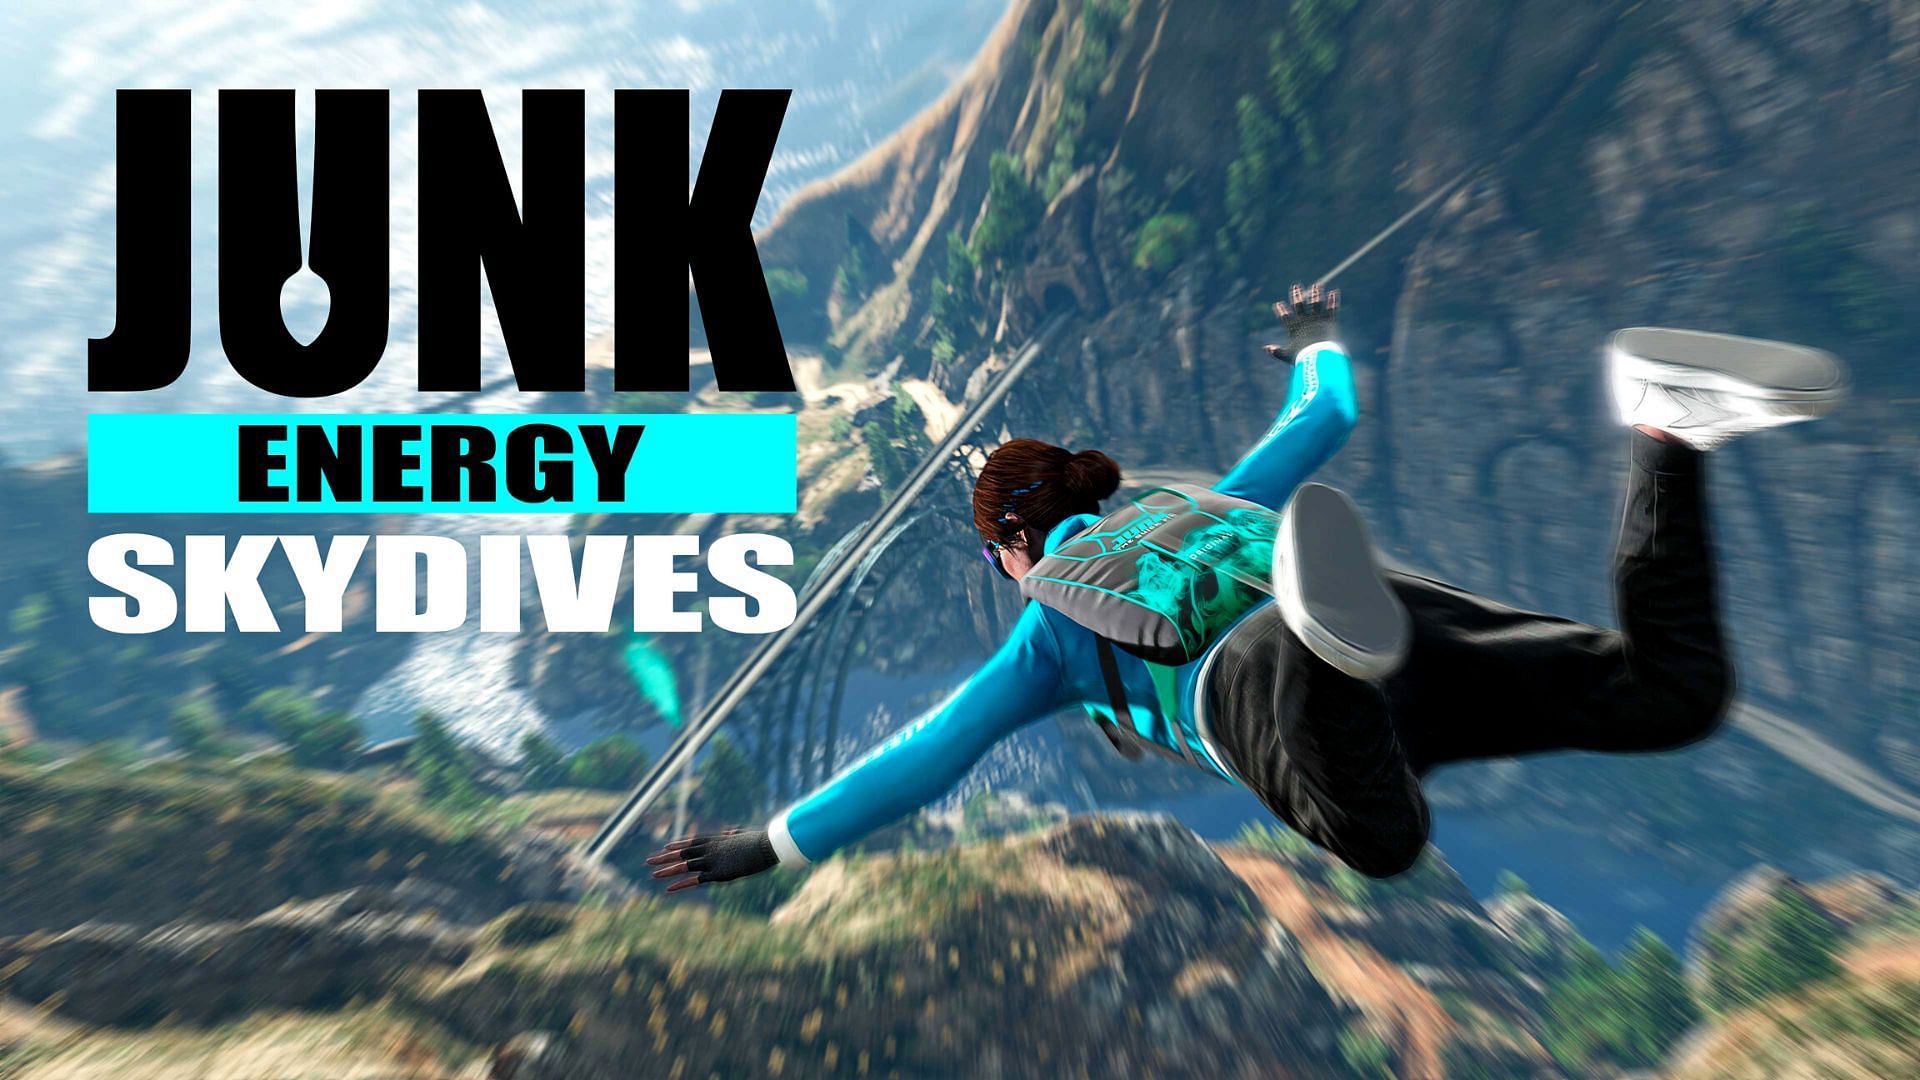 A brief about the GTA Online Junk Energy Skydives and 2x bonuses for playing it this week (Image via Rockstar Games)